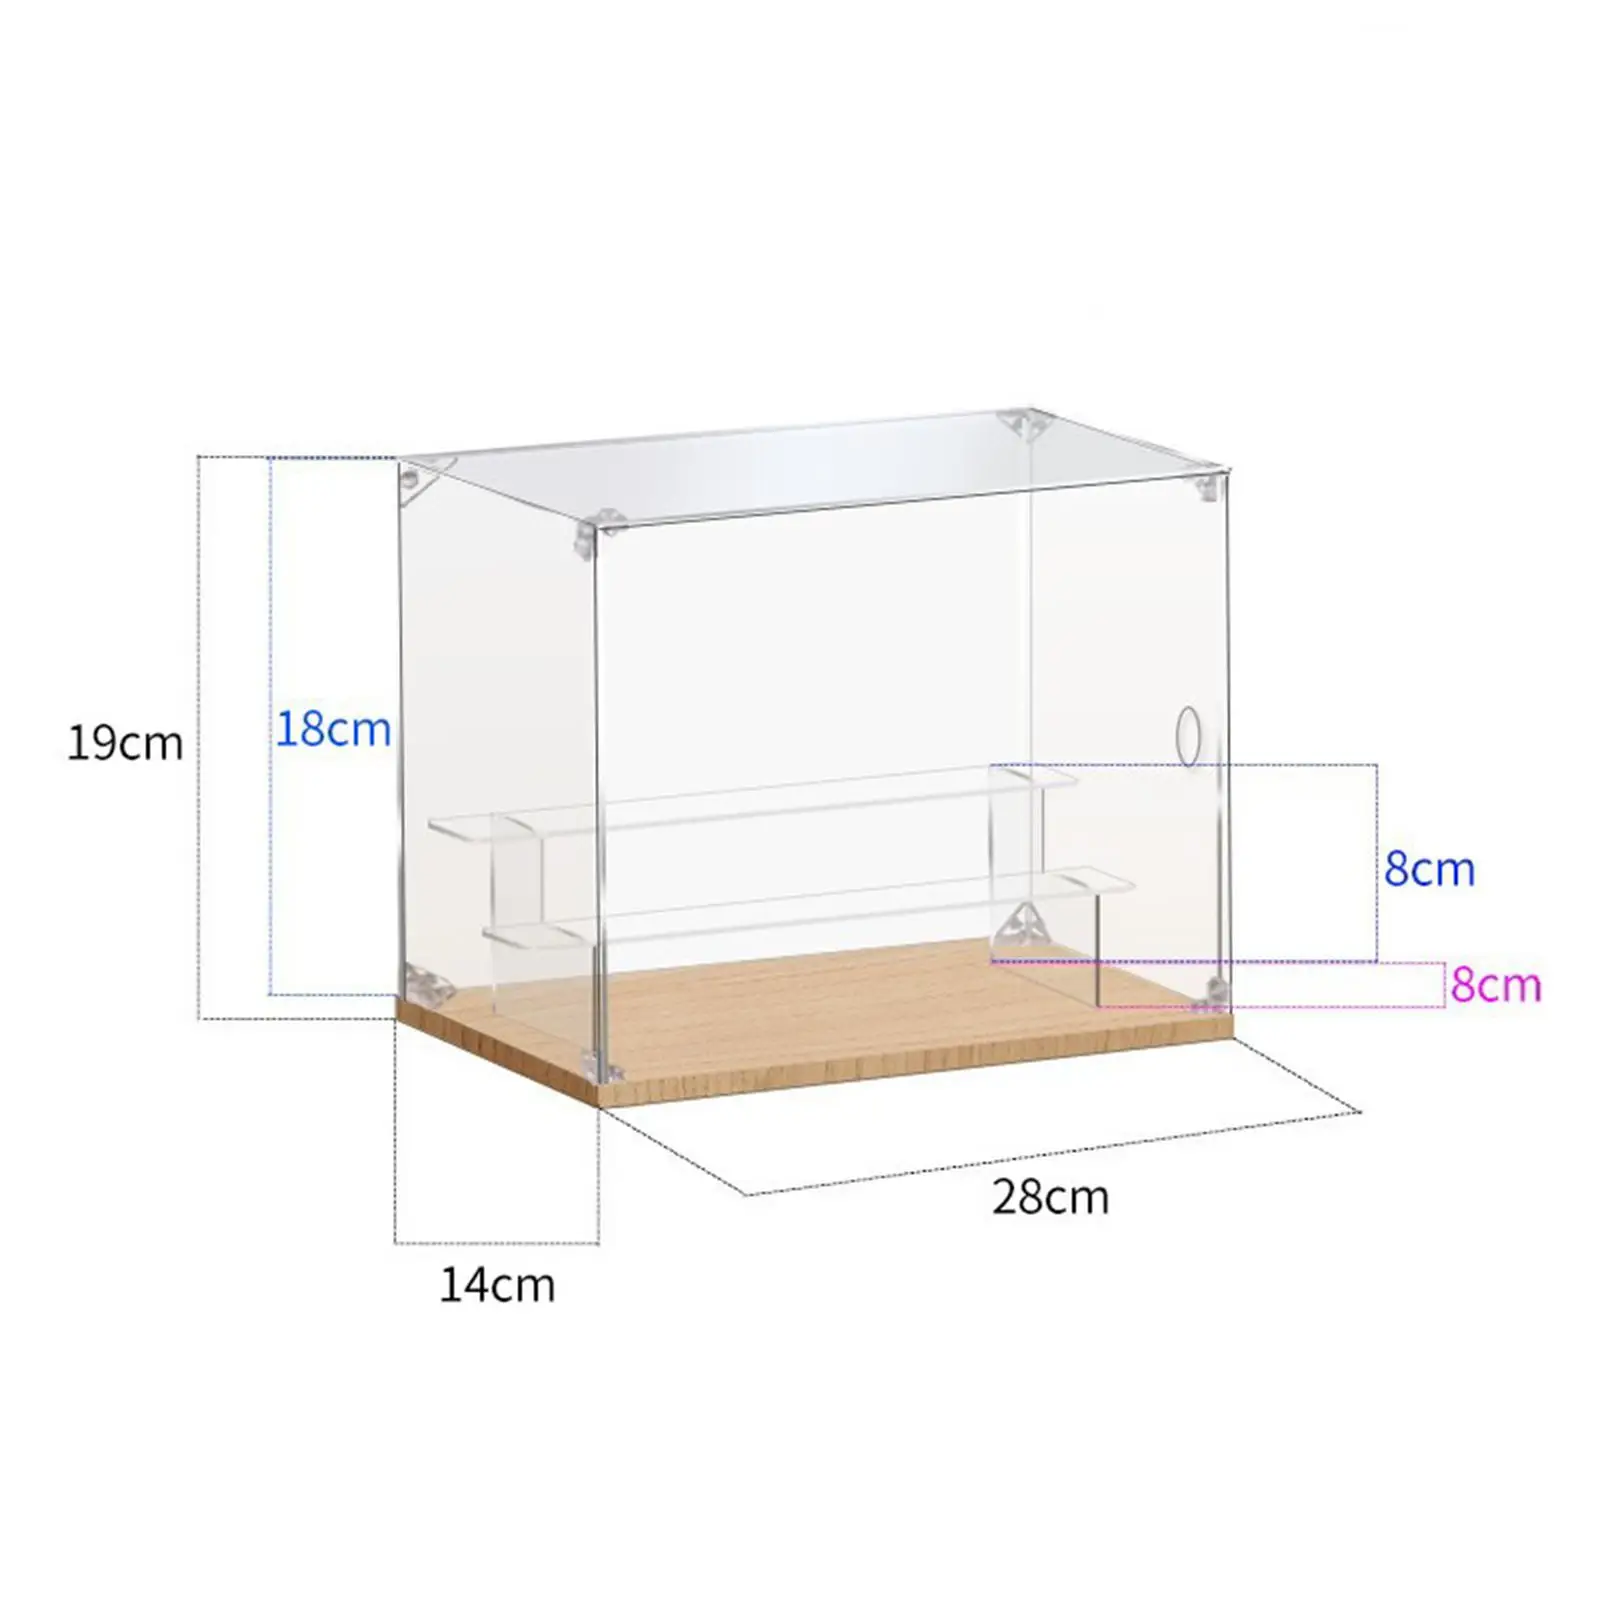 Transparent Acrylic Display Case for Collectibles Ladder Rack for Retail